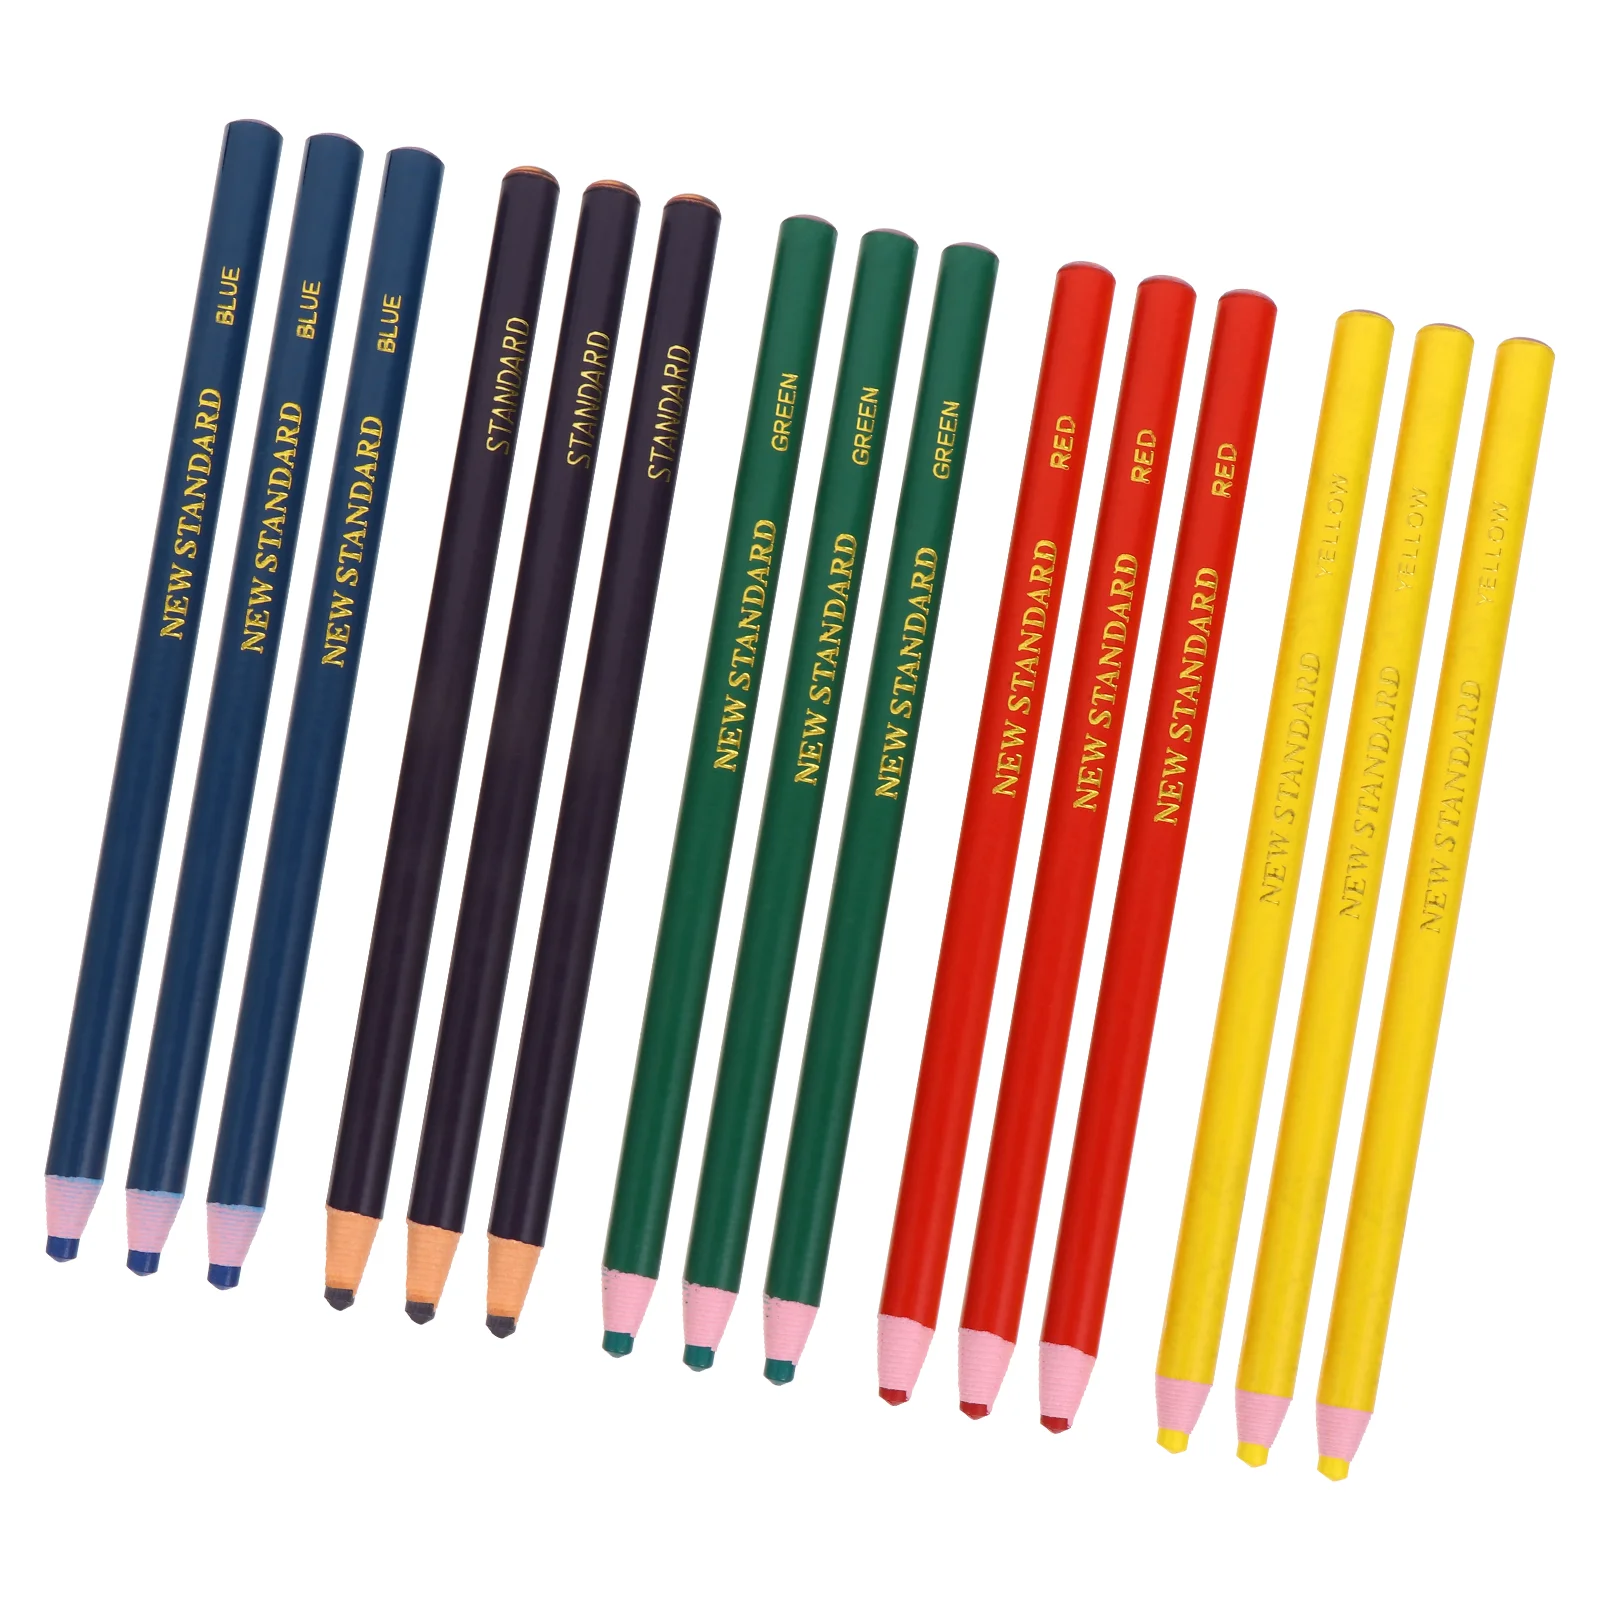 

15 Pcs Pull Crayons Creative ZChild Colour Pen Childrens Pencils Peel-off China Marker Stationery For Painting Kids